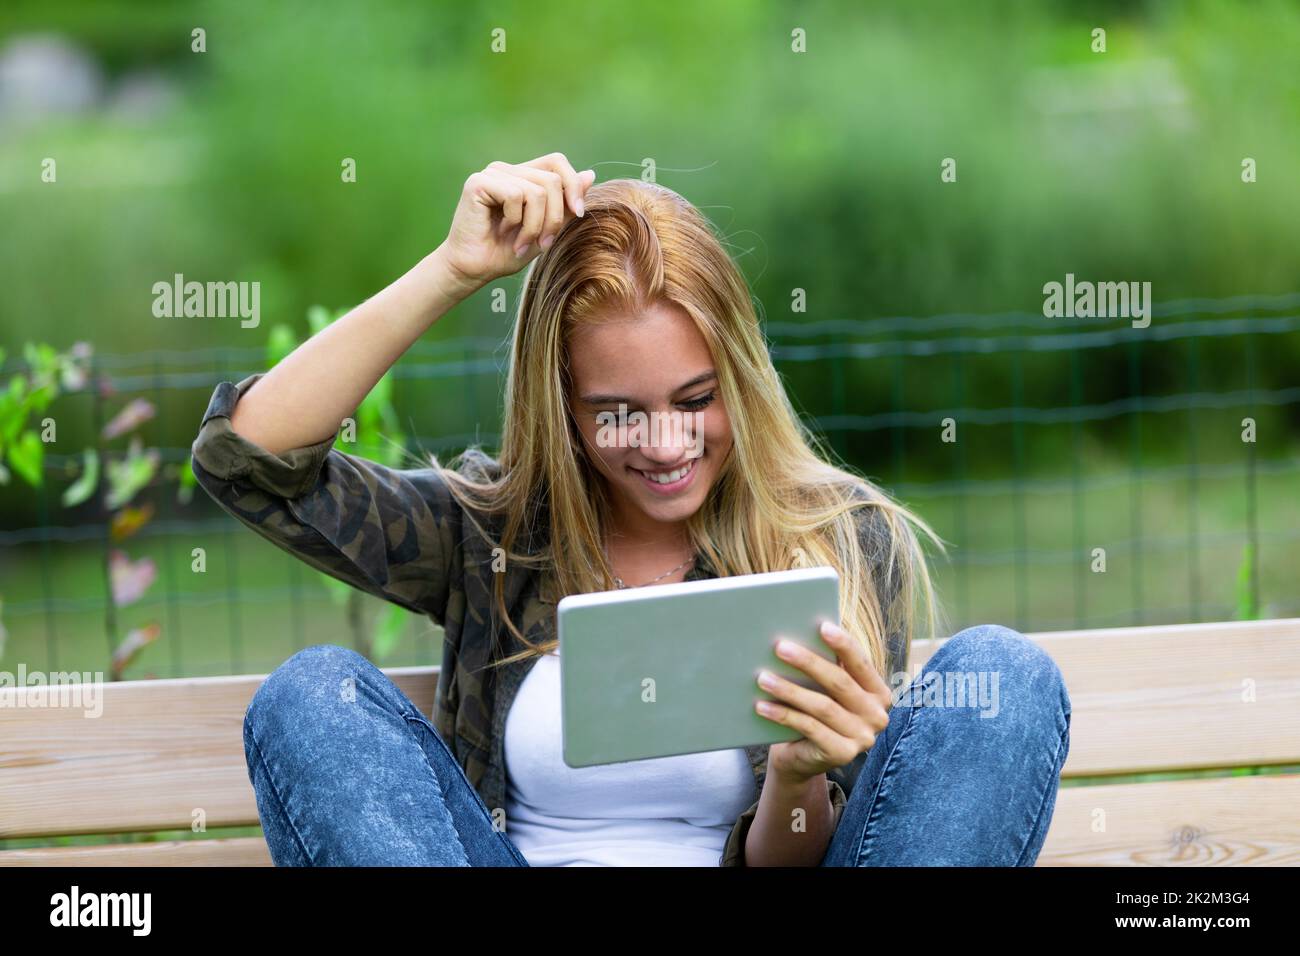 Happy smiling young woman scratching her head Stock Photo